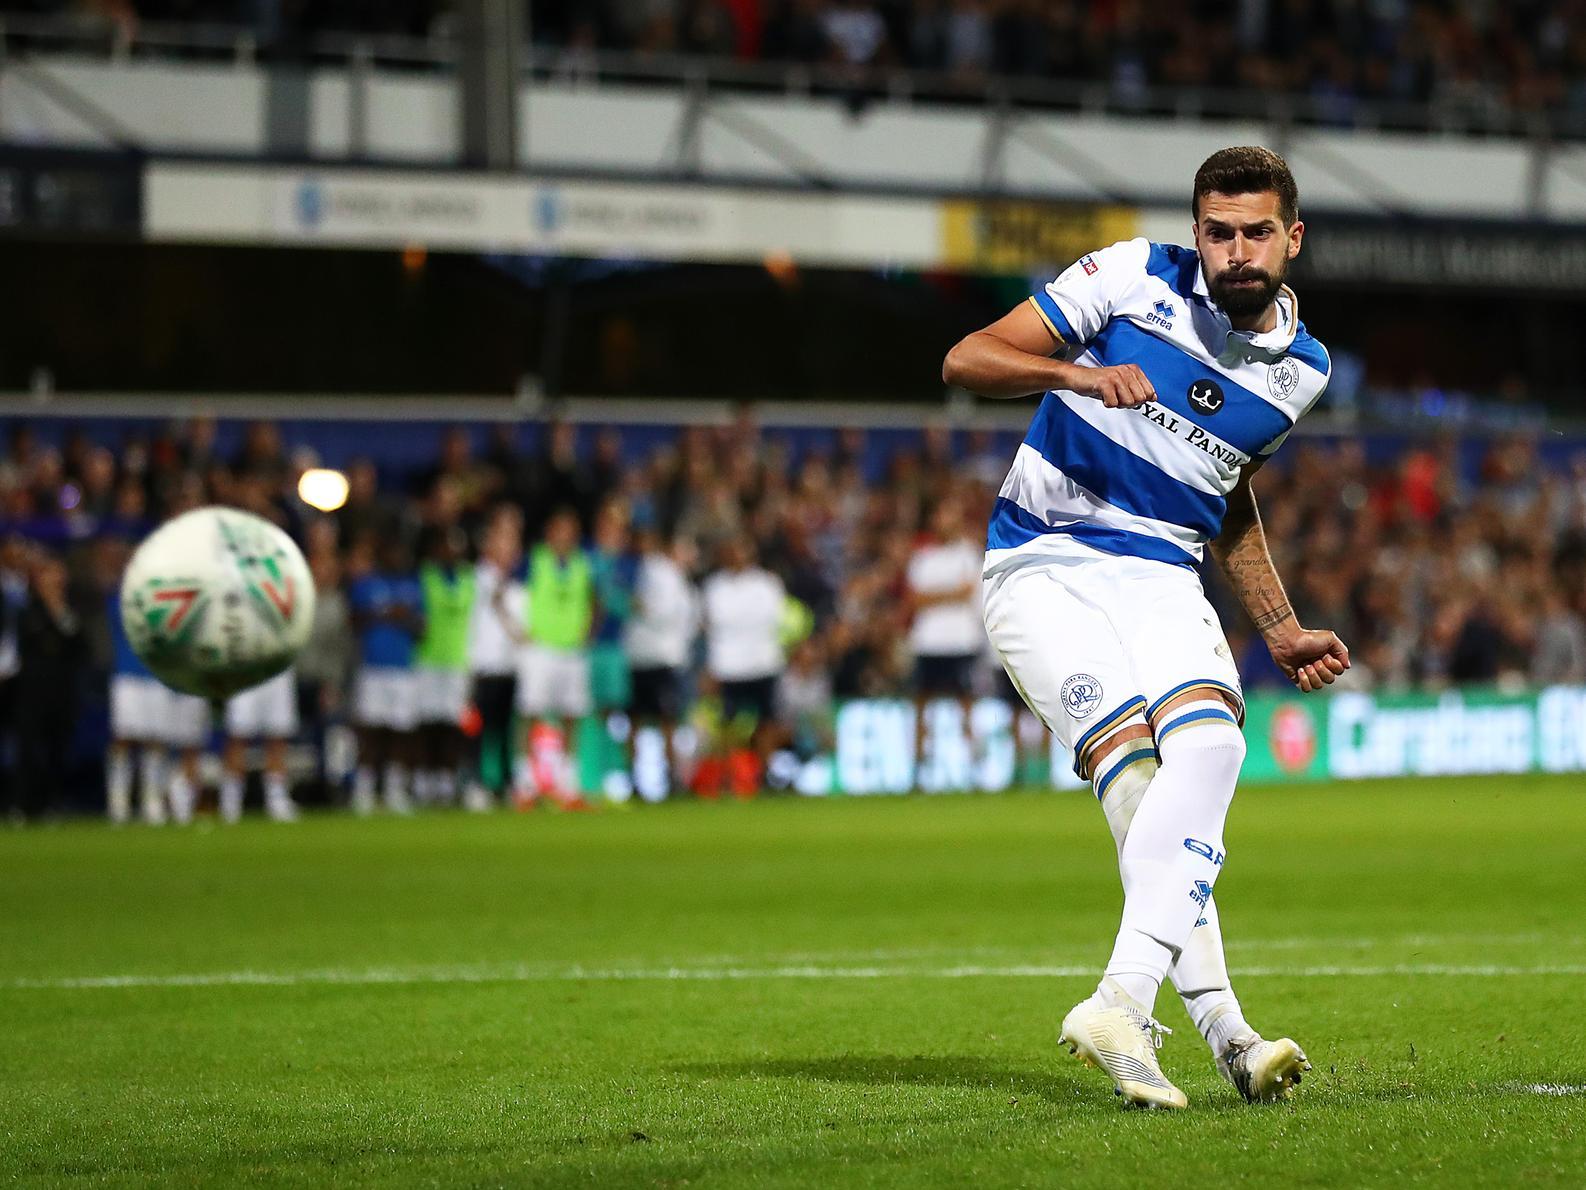 QPR look set to receive a major morale boost in the coming weeks, with their versatile defender Yoann Barbet on the verge of making his return after a three-month lay-off with injury. (Football League World)